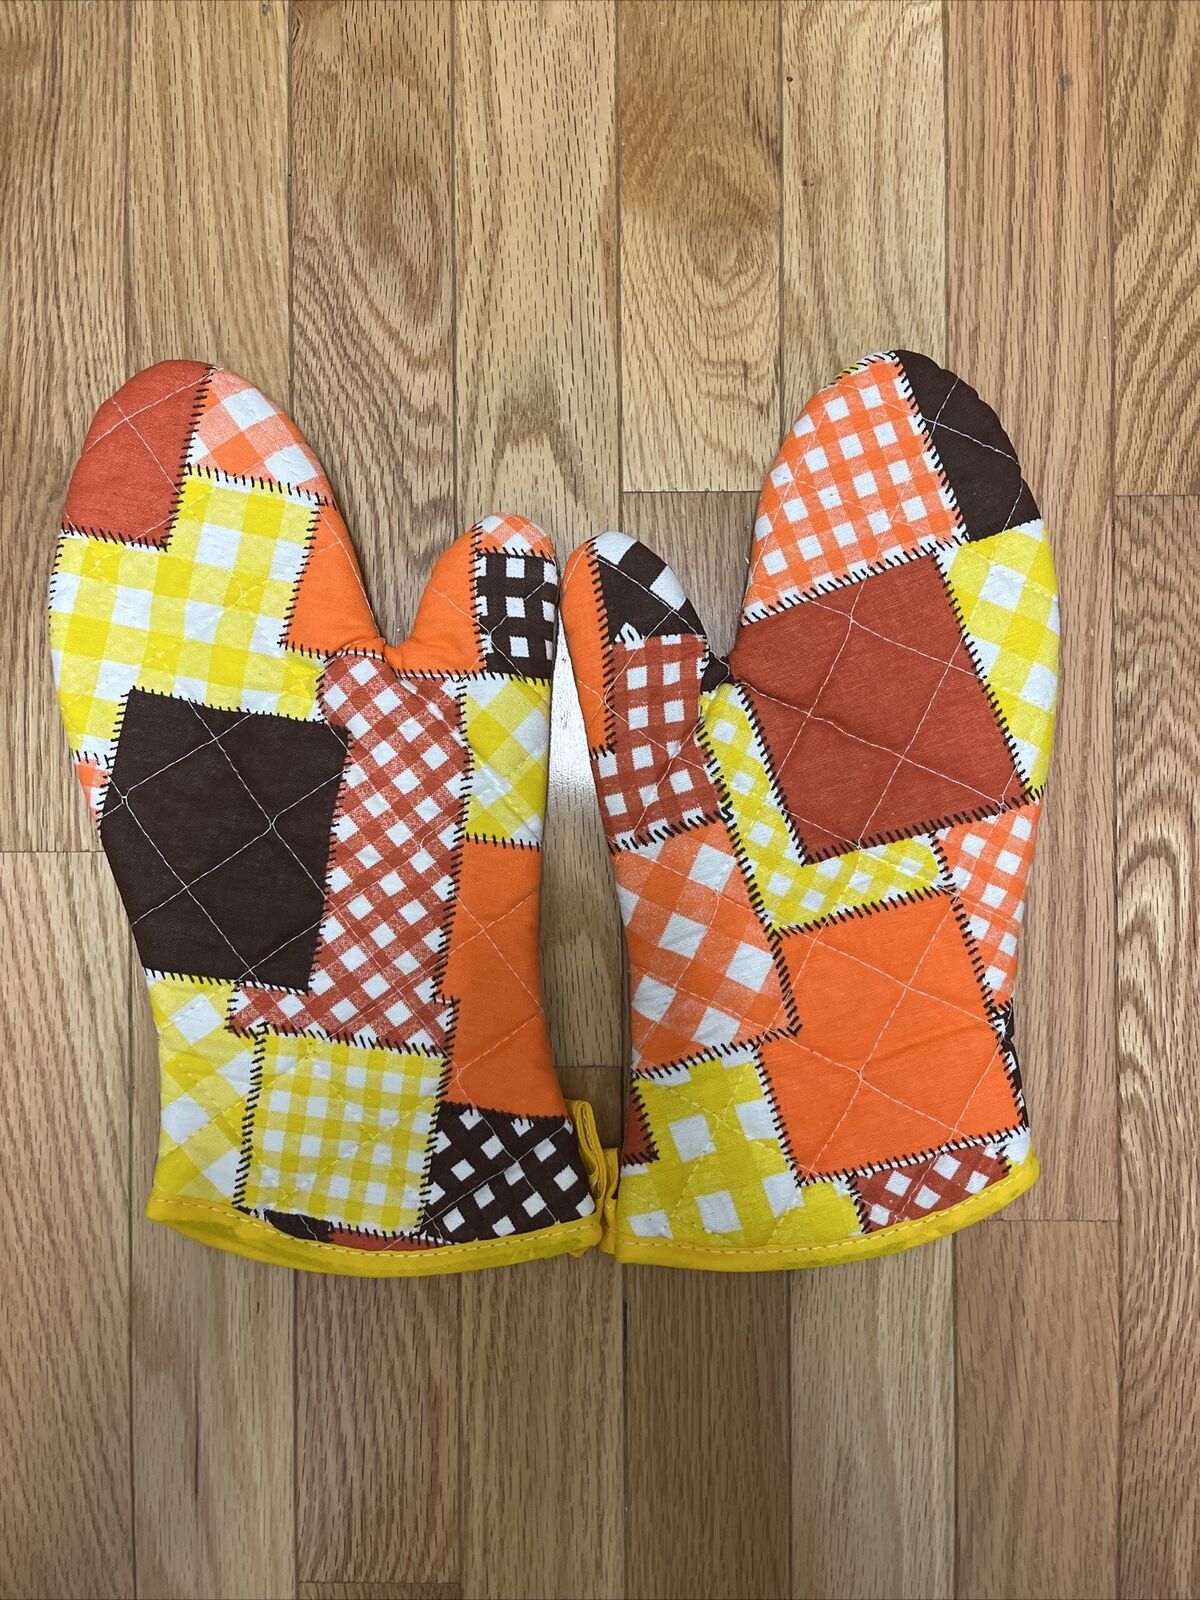 Vintage Quilted Patchwork Extra Long Cook Bake Barbecue Oven Mitts Magla Teflon